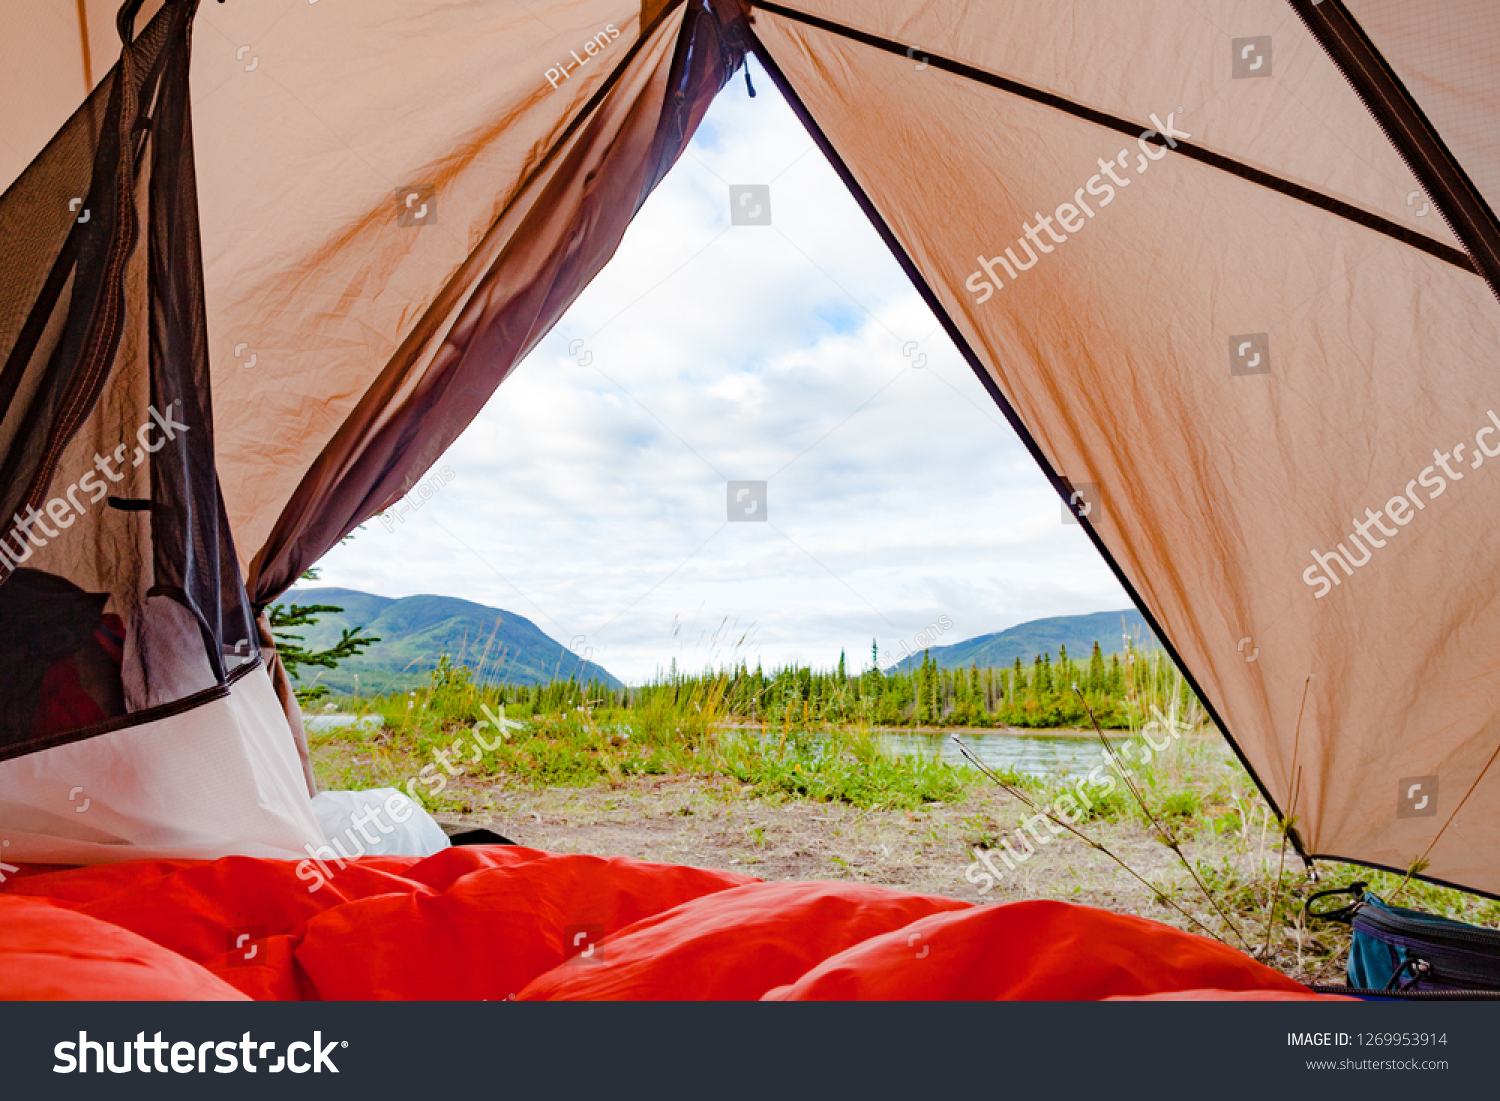 Campsite wilderness nature view of Yukon River, Yukon Territory, YT, Canada, from inside a tent with sleeping bag laid out #1269953914